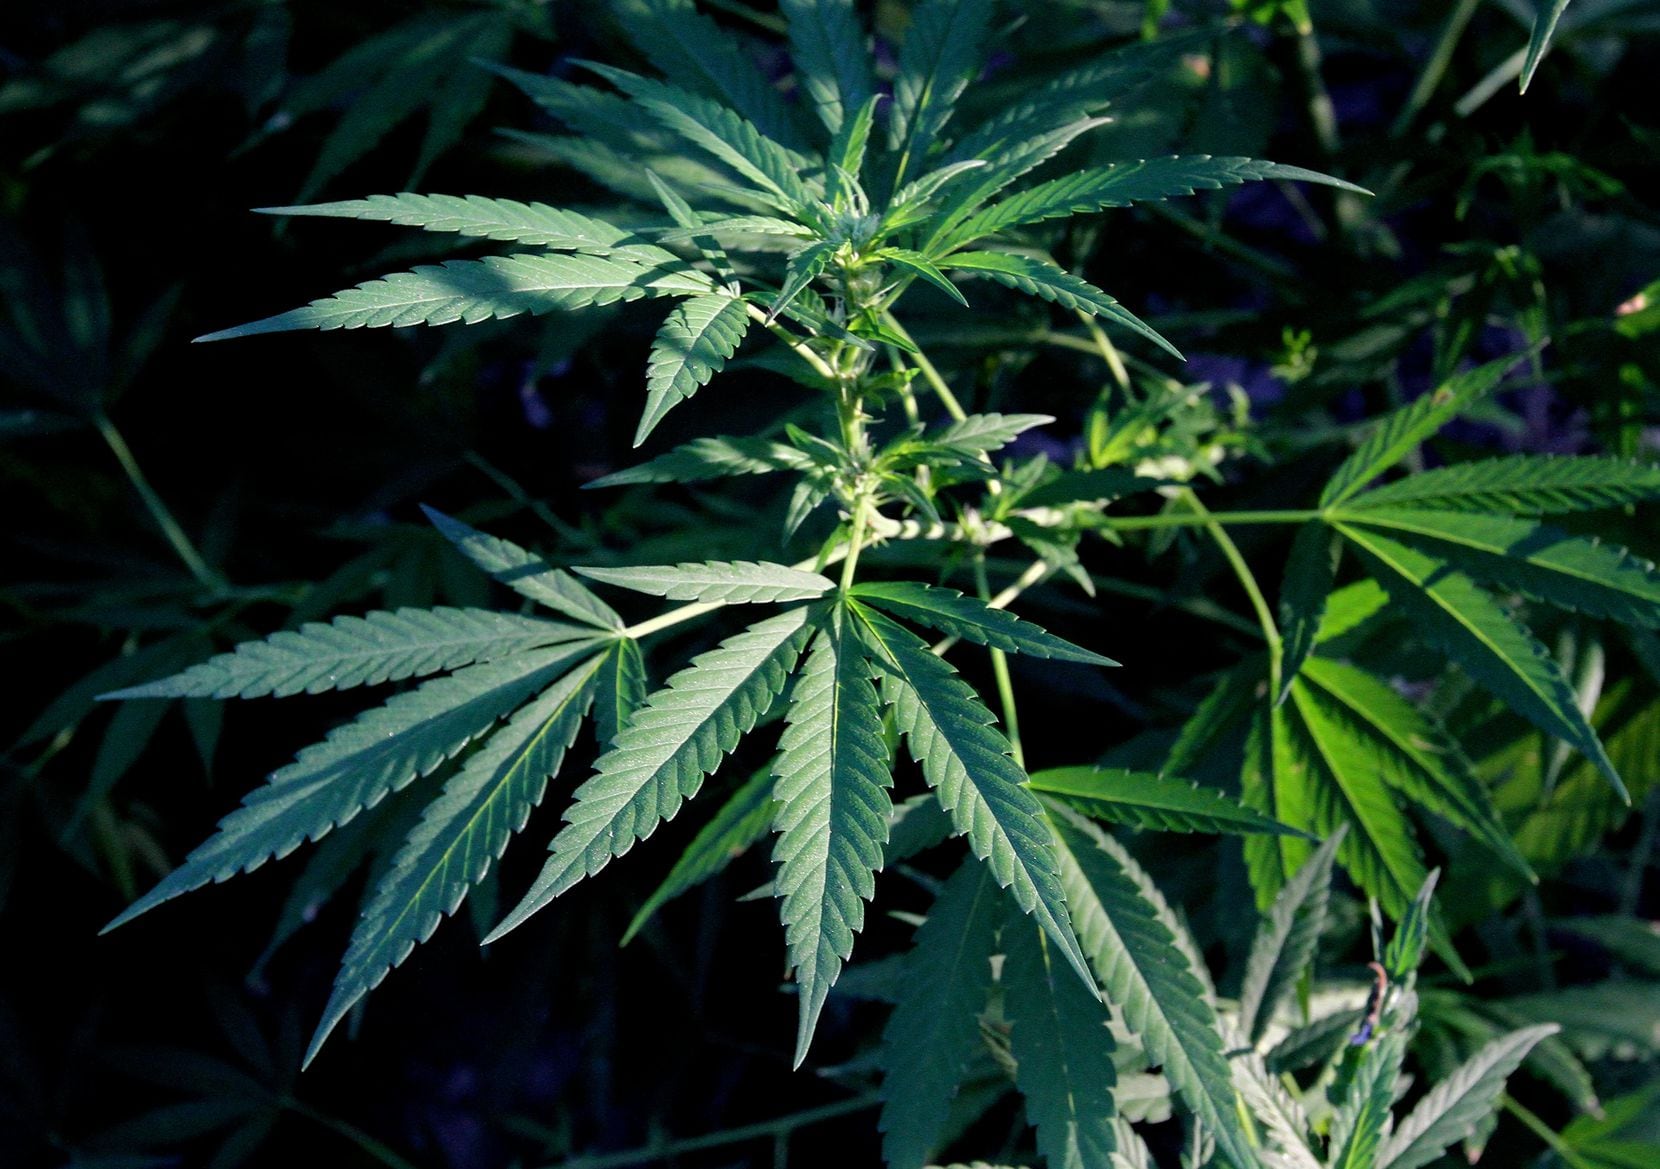 Some Texas lawmakers want to expand permissible medical marijuana laws to include use by...